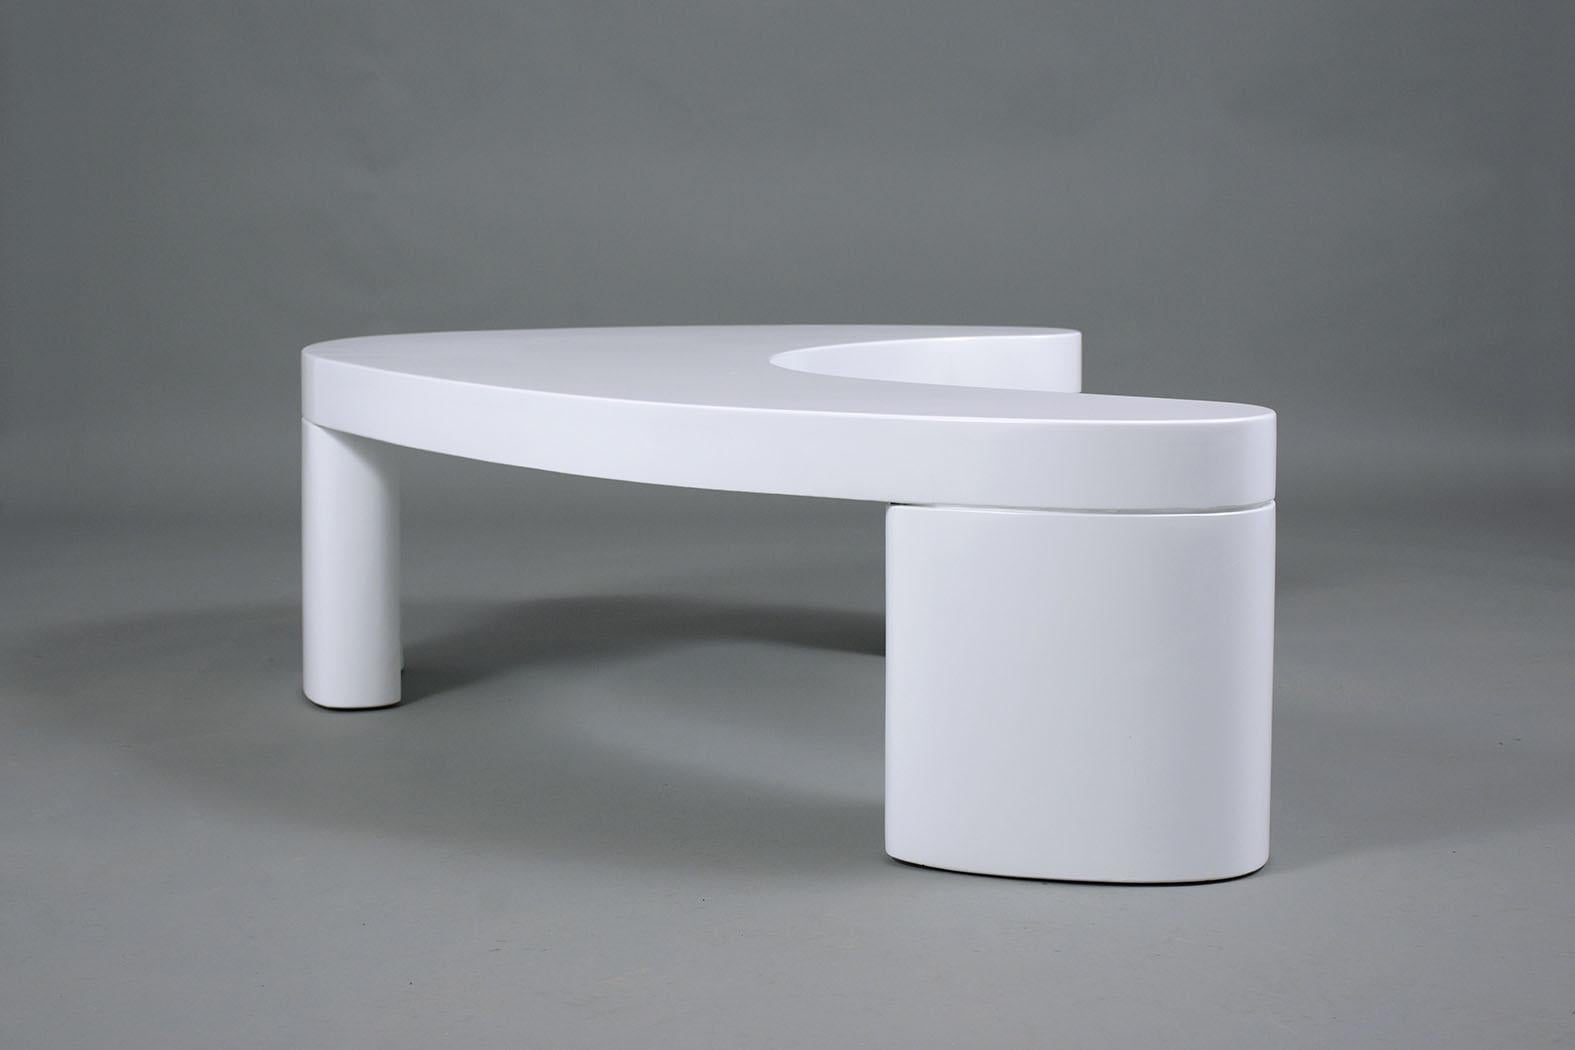 A remarkable Mid-Century Modern coffee table features a kidney-shaped design and has been professionally restored and newly stained in a white lacquer finish. This unique table sits on three oval pedestal legs and is the perfect addition to a